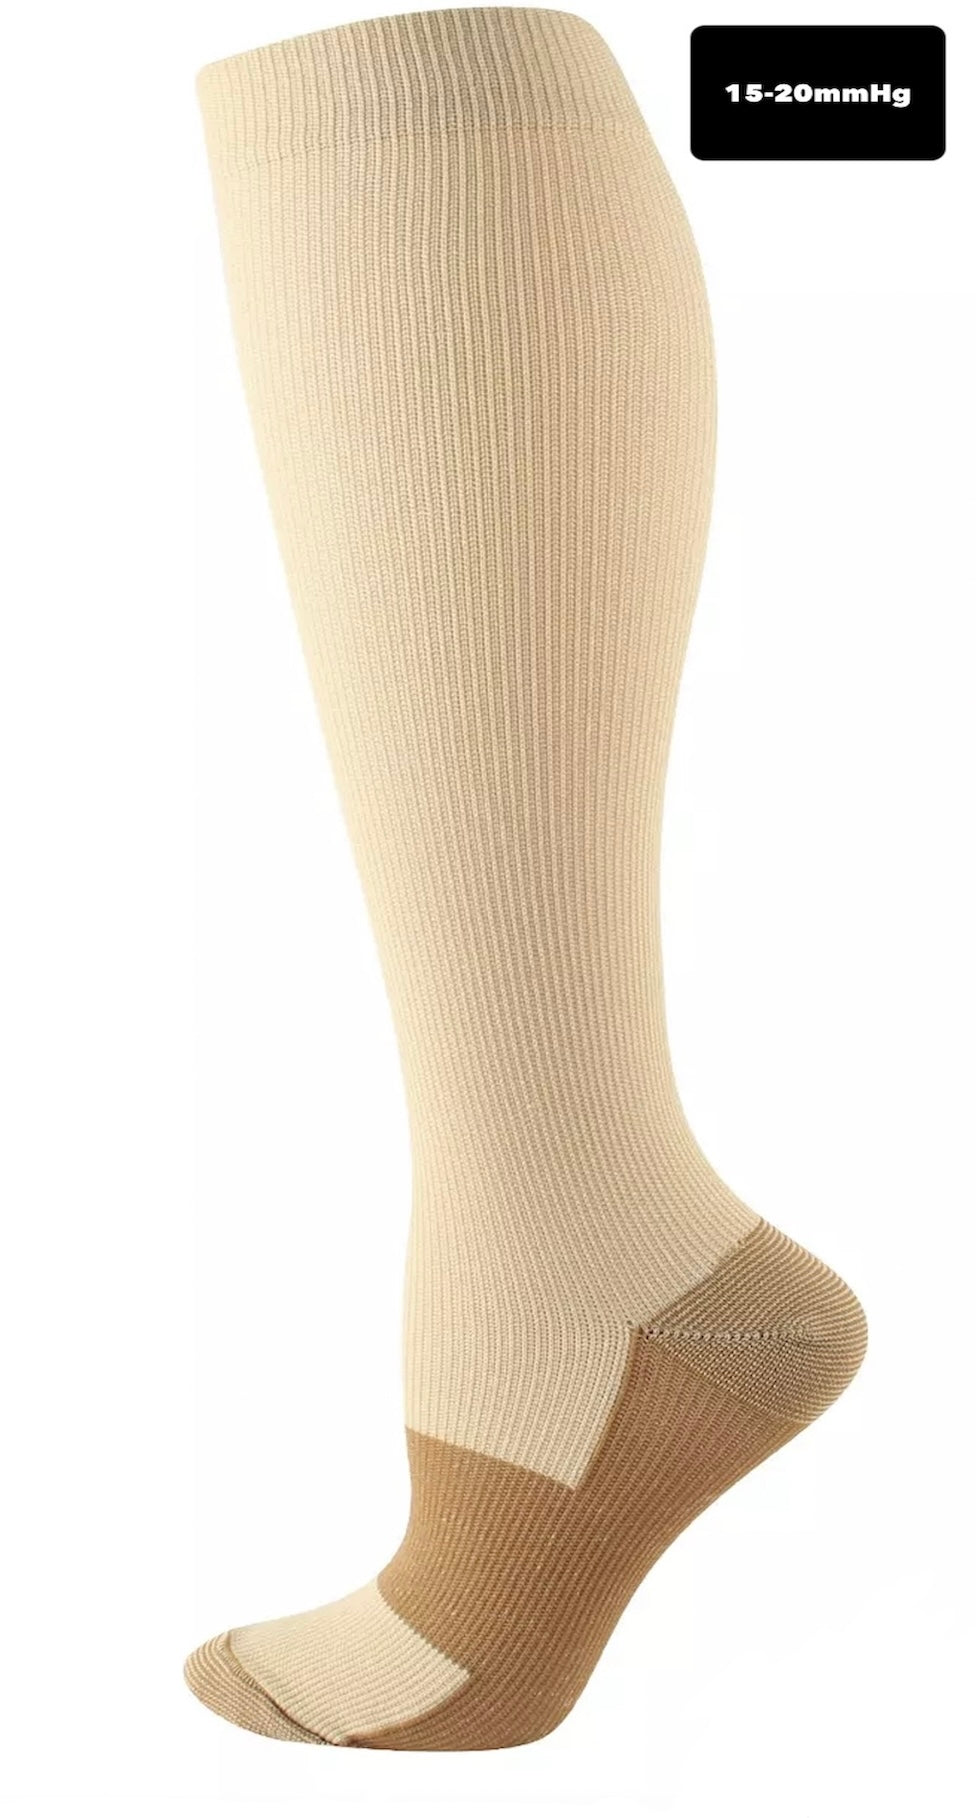 Thigh High 20-30mmHg Medical Compression Stockings Socks Mens and Women's  S-4XL